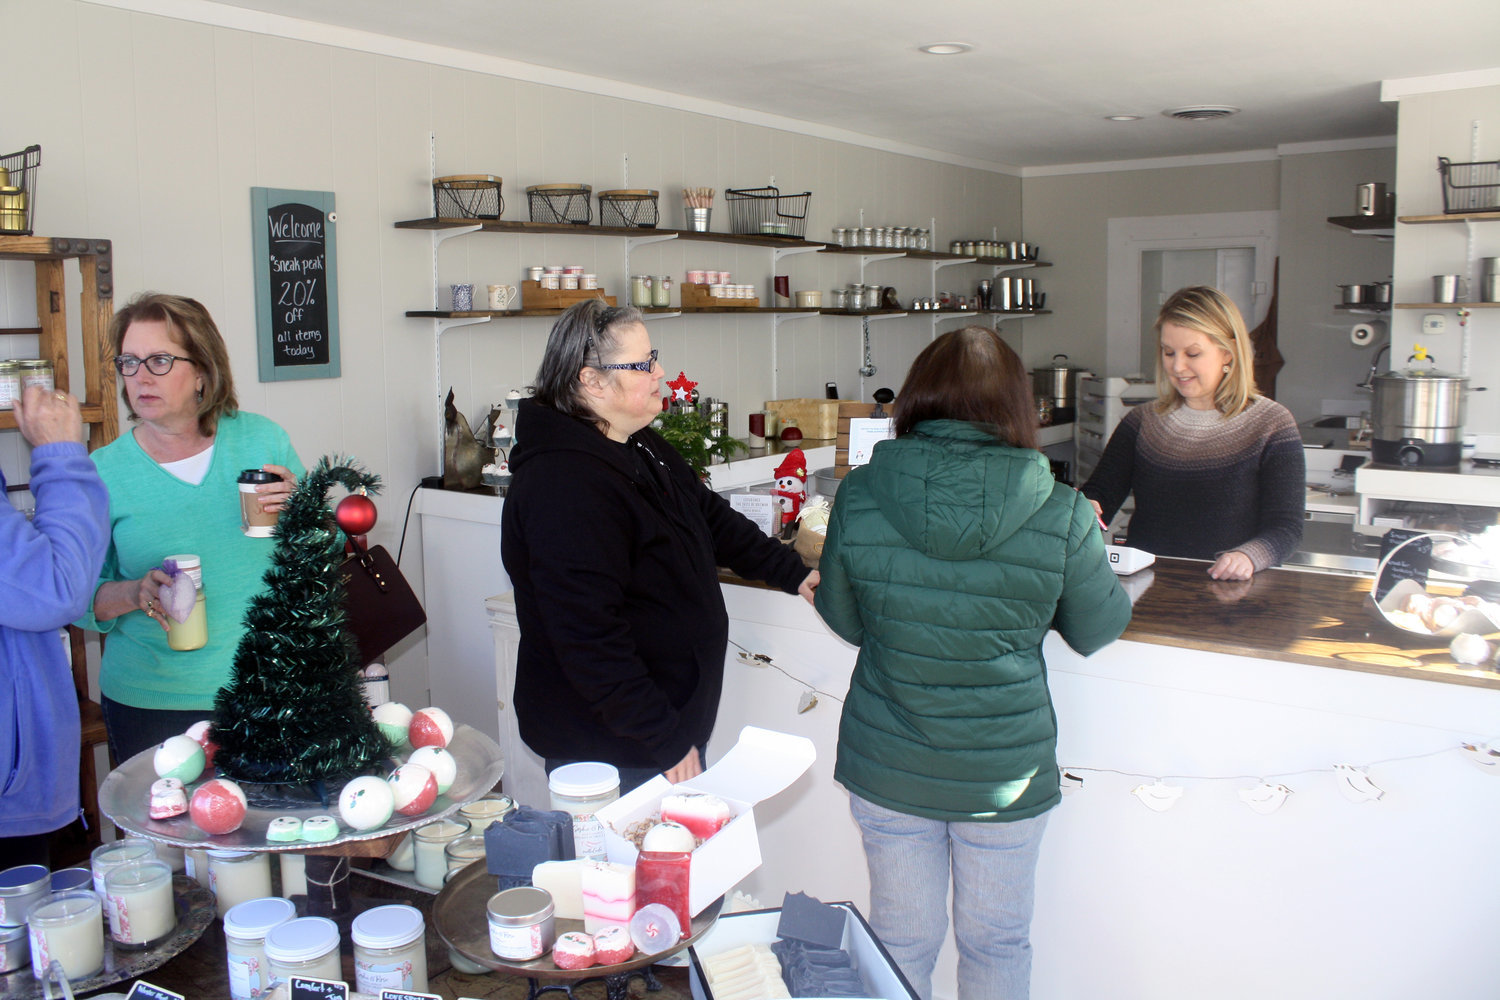 Customers shop at Sophie & Rose, the new handmade soap and candle shop in Quitman, during the soft opening event on Dec. 15.